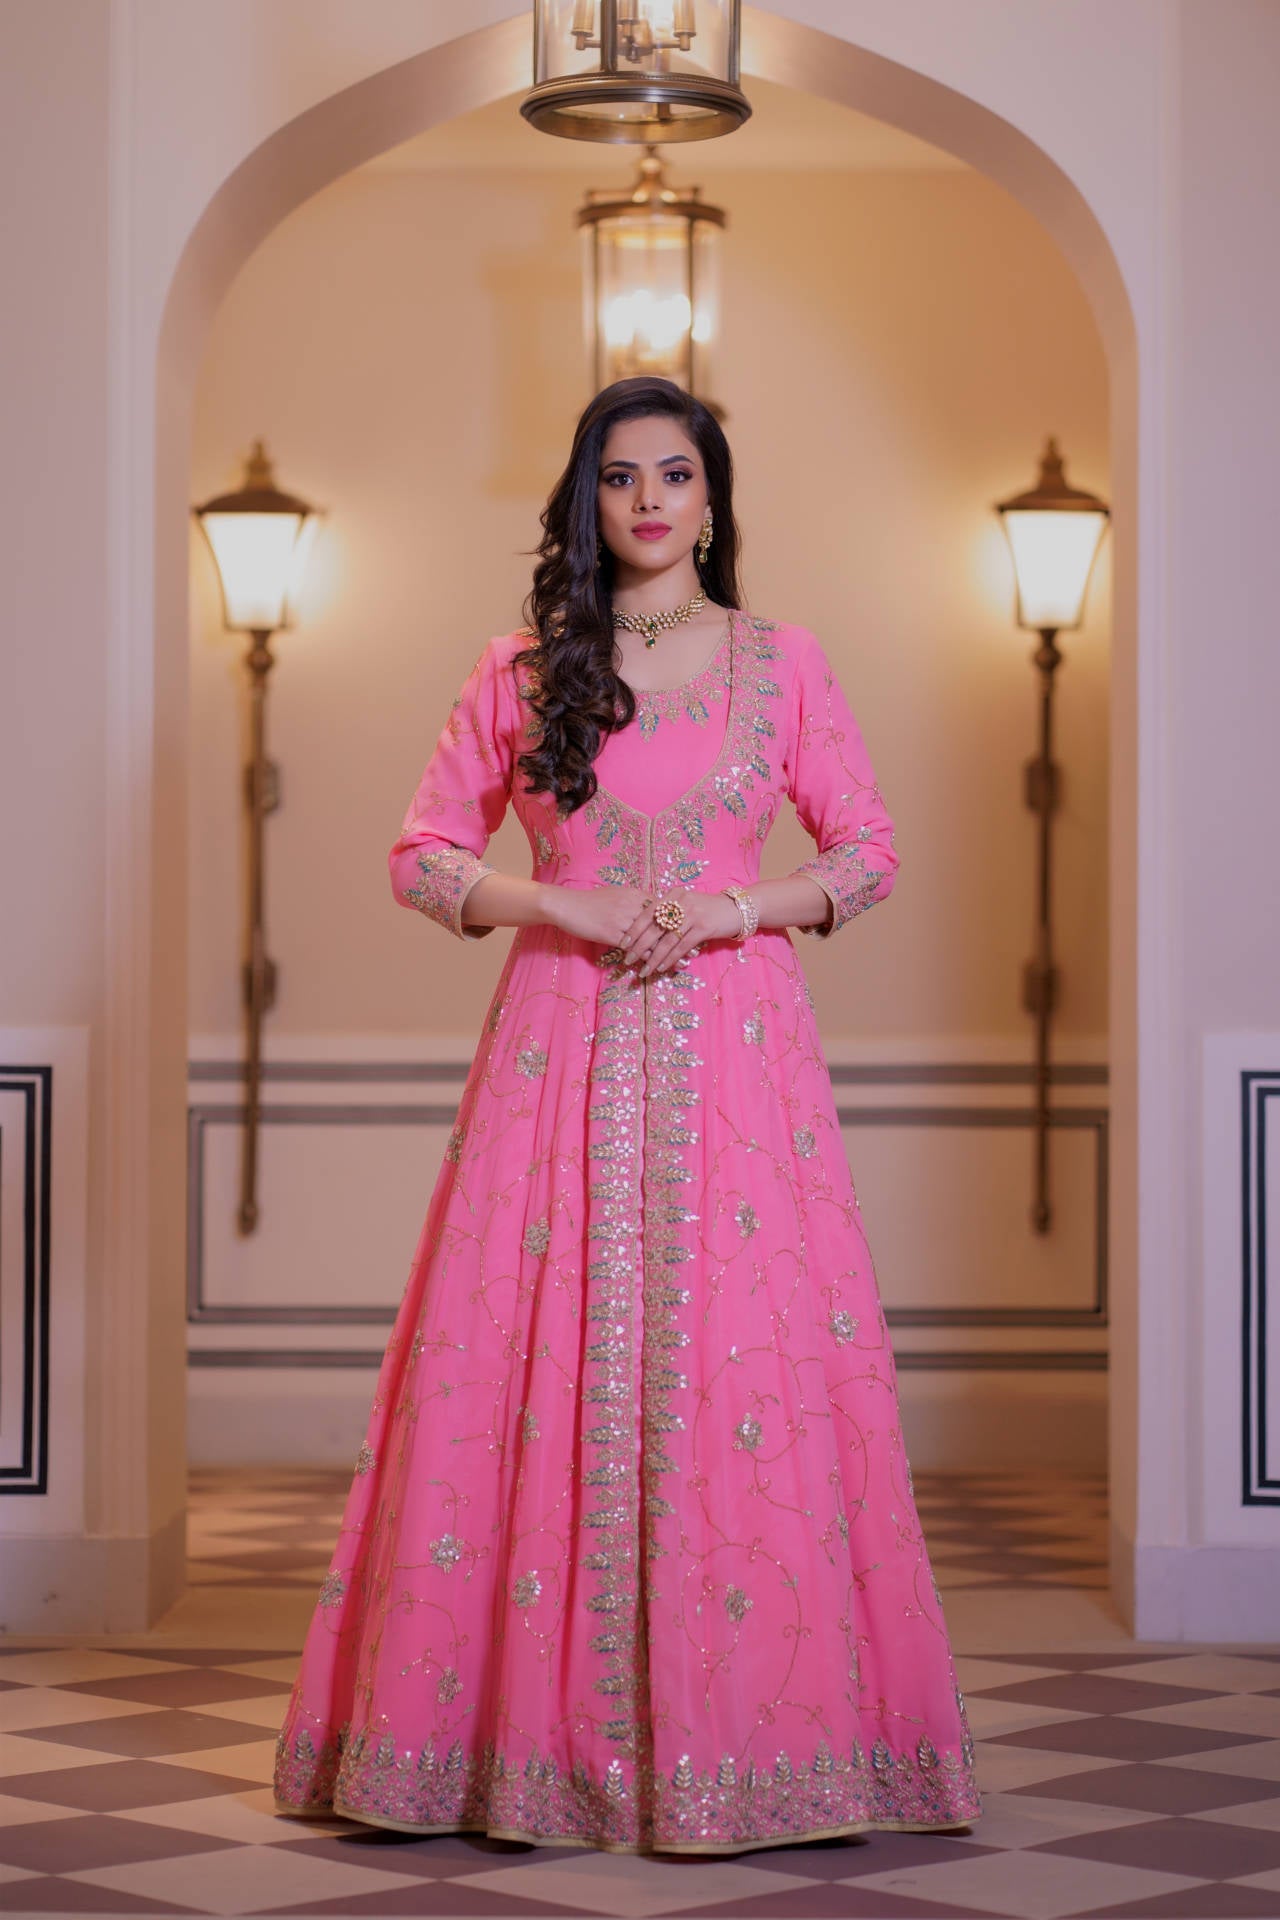 Regal Reception Outfit Hand Embroidered in Pure Georgette